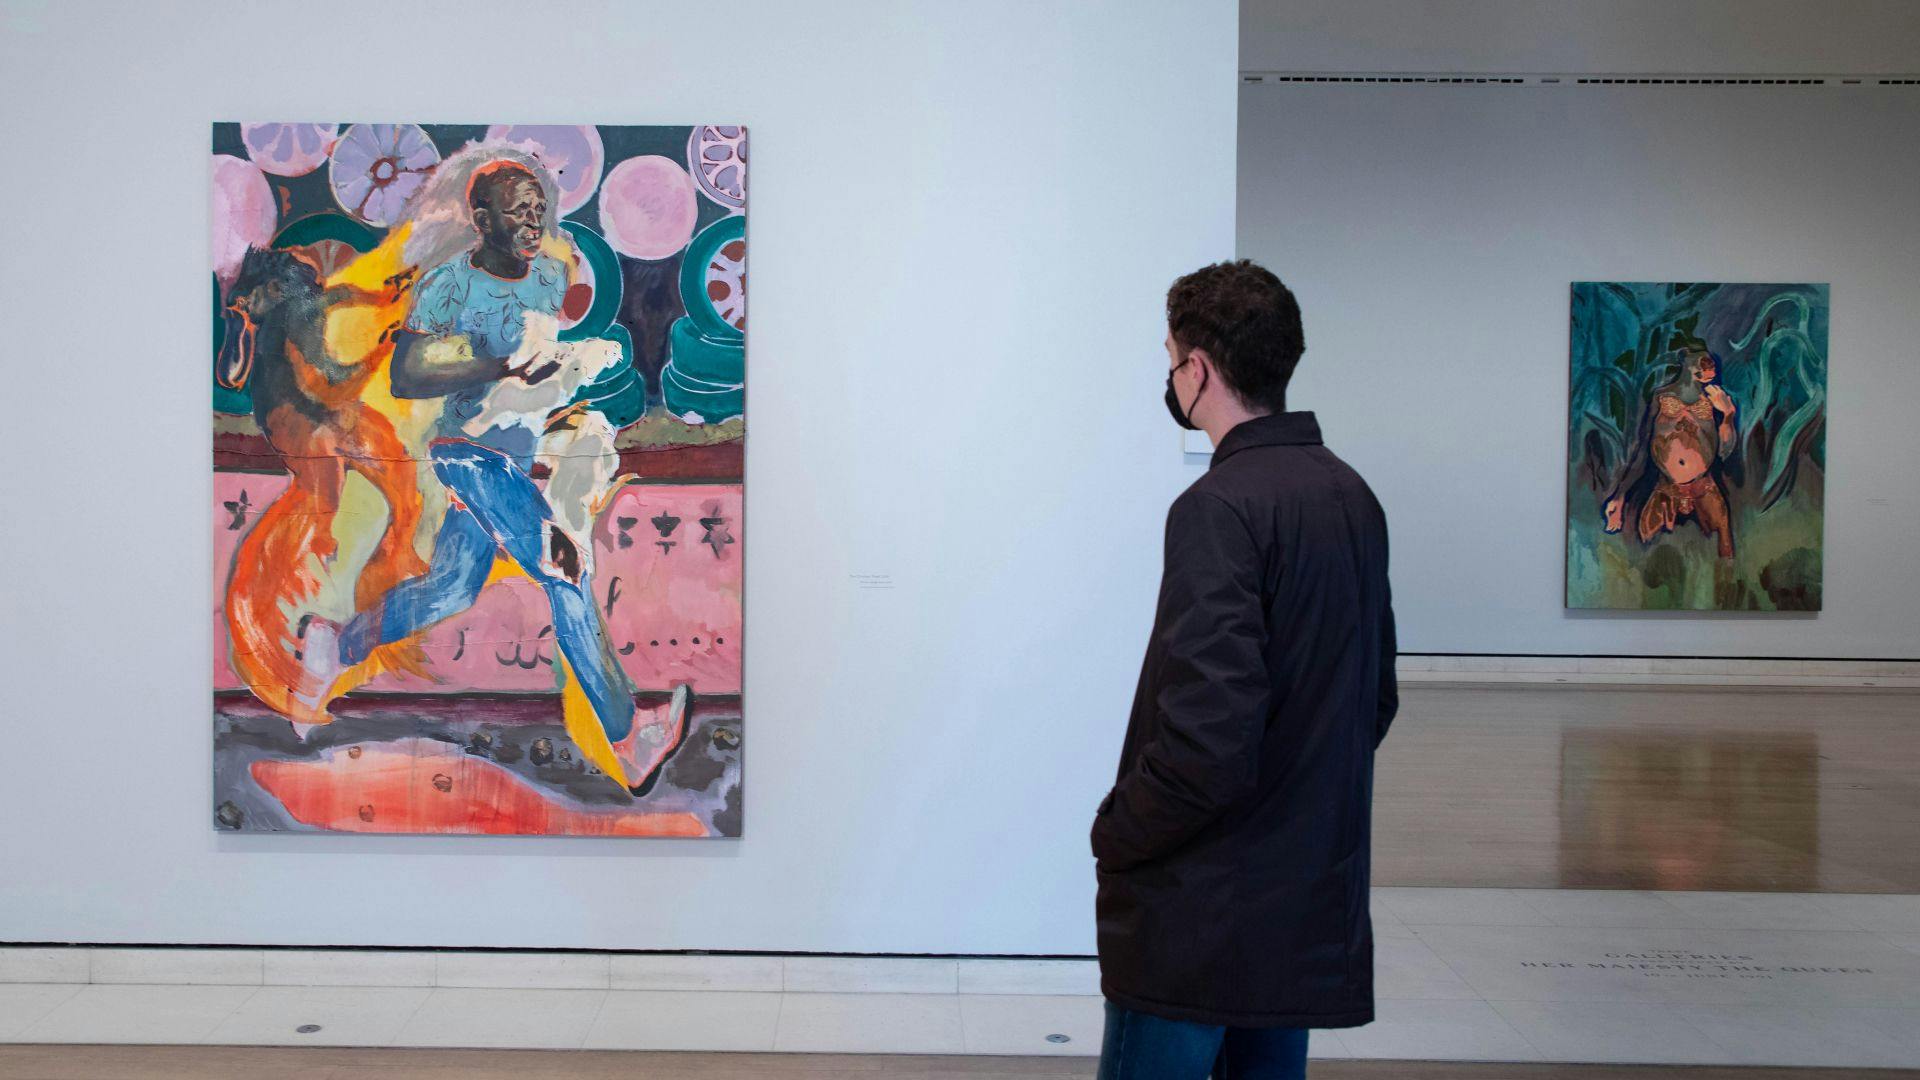 Installation view of the exhibition, Michael Armitage: Paradise Edict, at the Royal Academy of Arts in London, dated 2021.